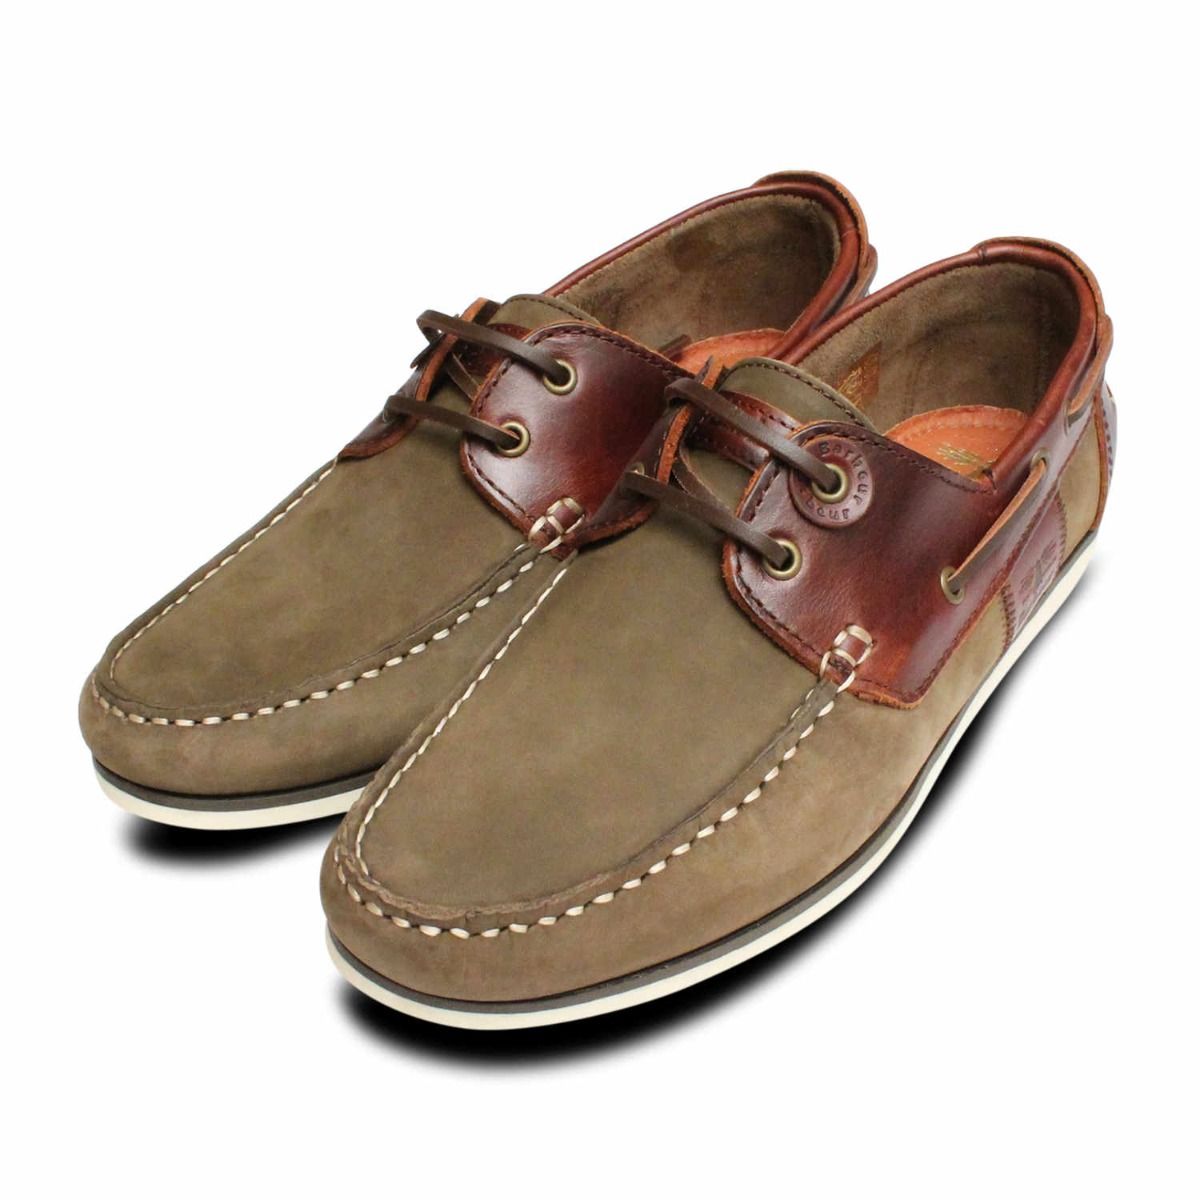 Barbour Capstan Boat Shoes in Olive 